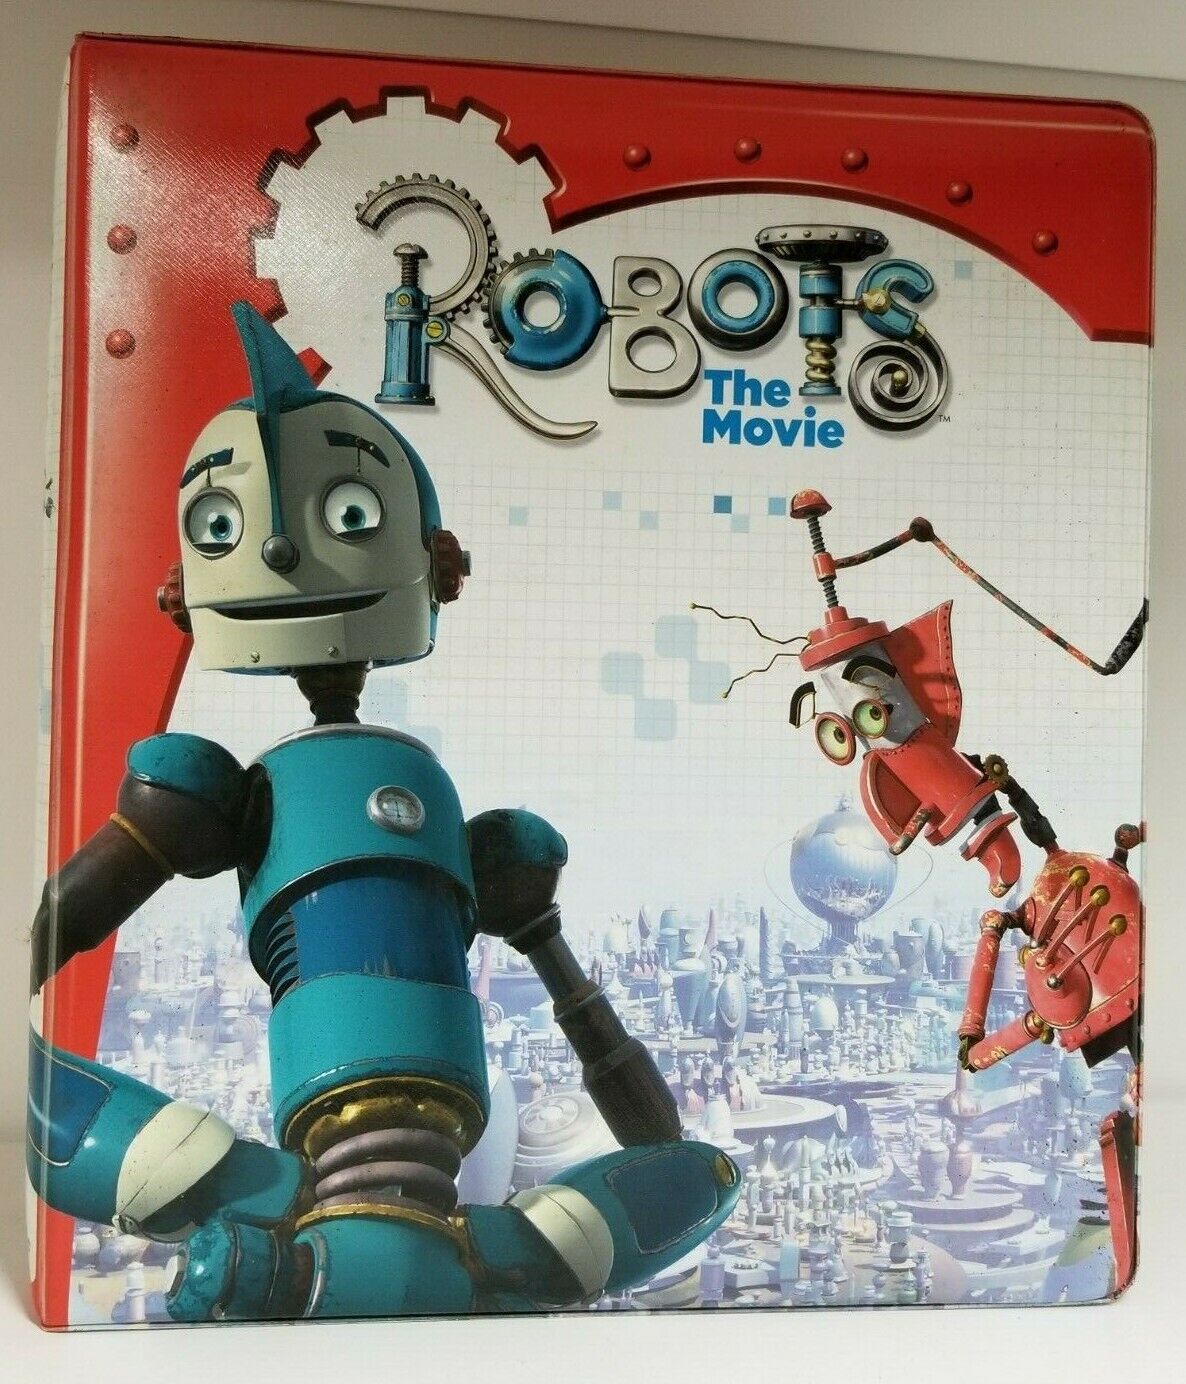 Robots The Movie Collectors Padded 3-ring Trading Card Binder Album